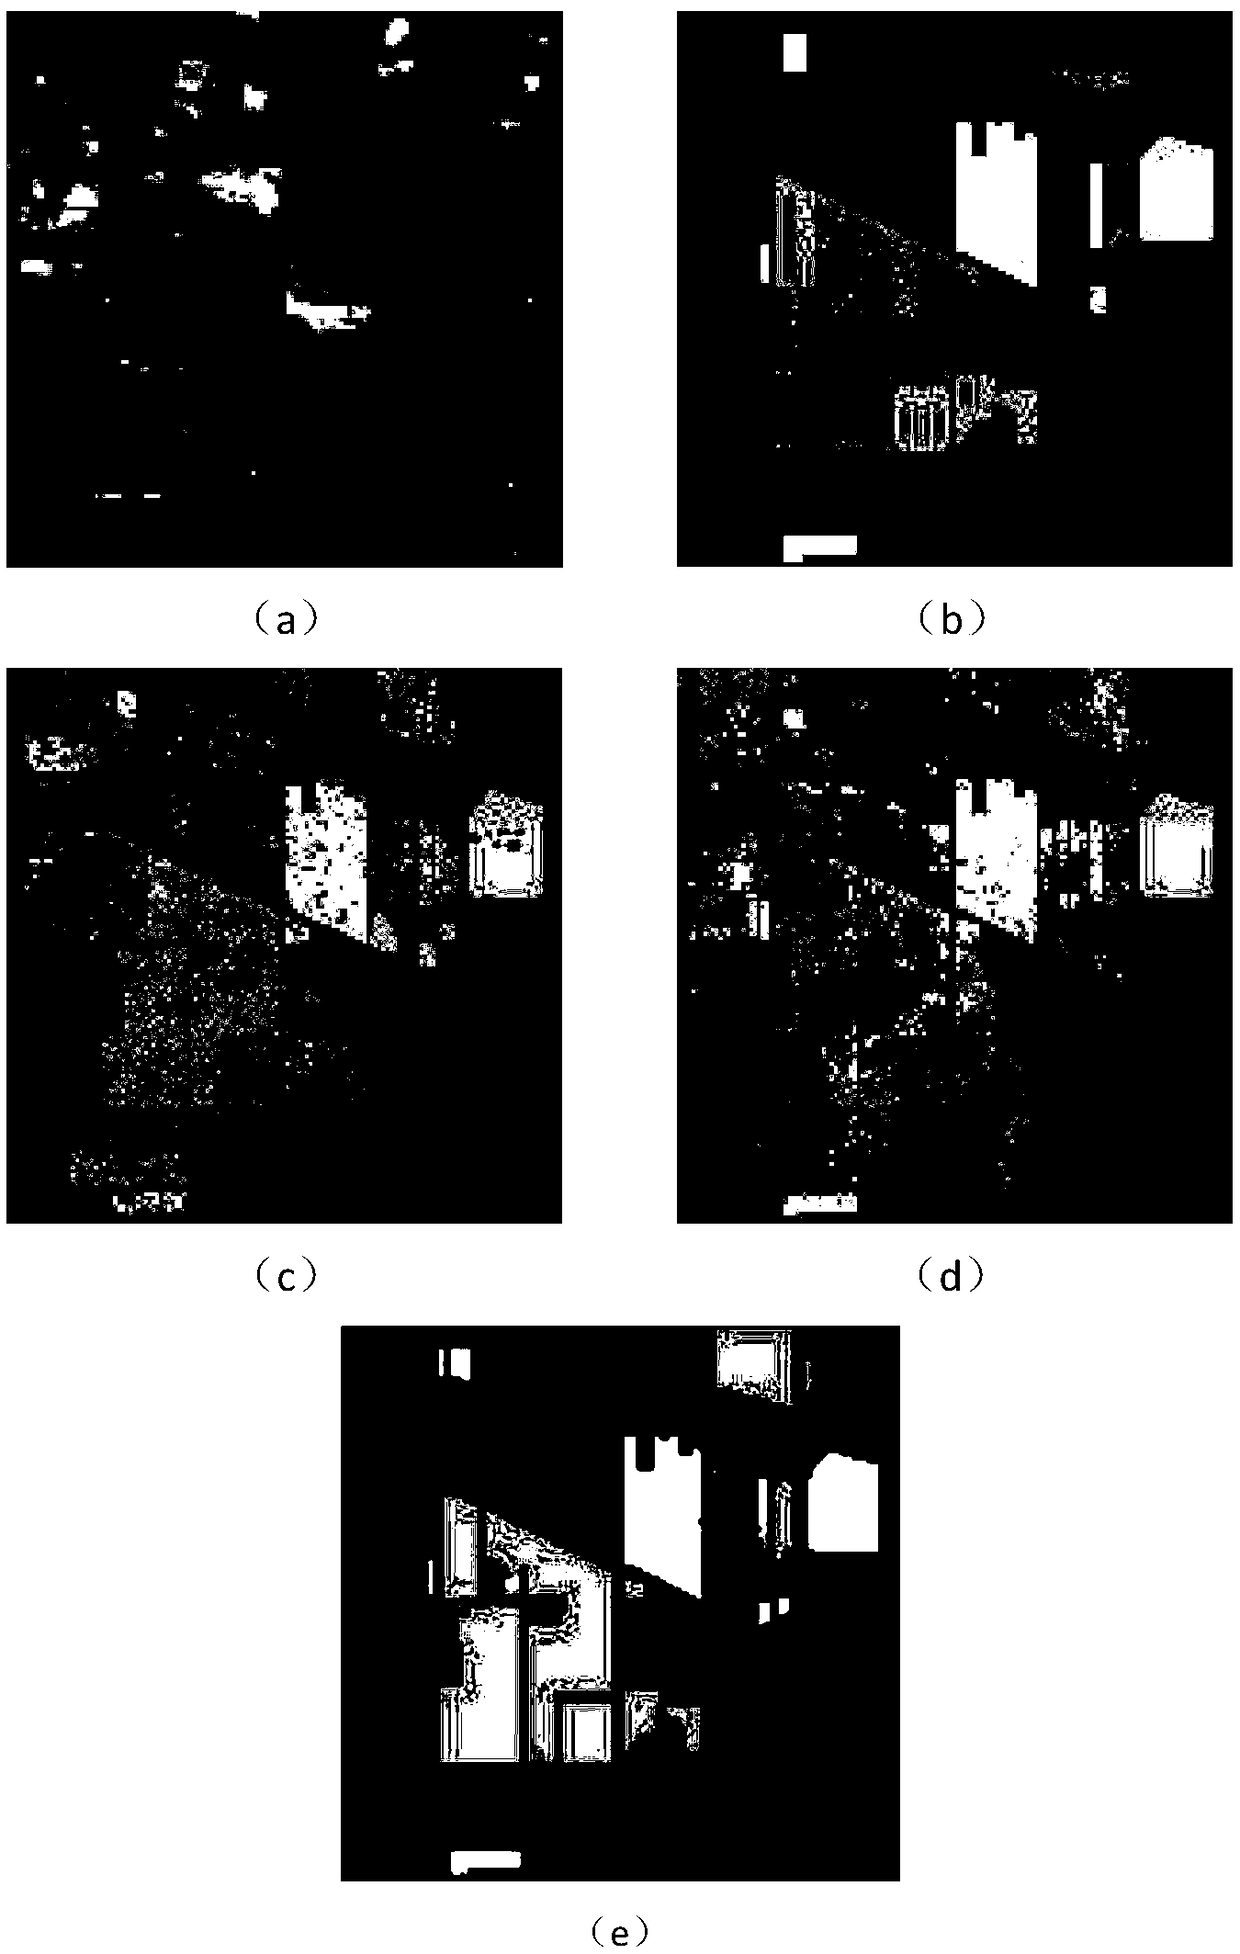 A hyperspectral image classification method based on a cooperative generation antagonistic network and a space spectrum combination